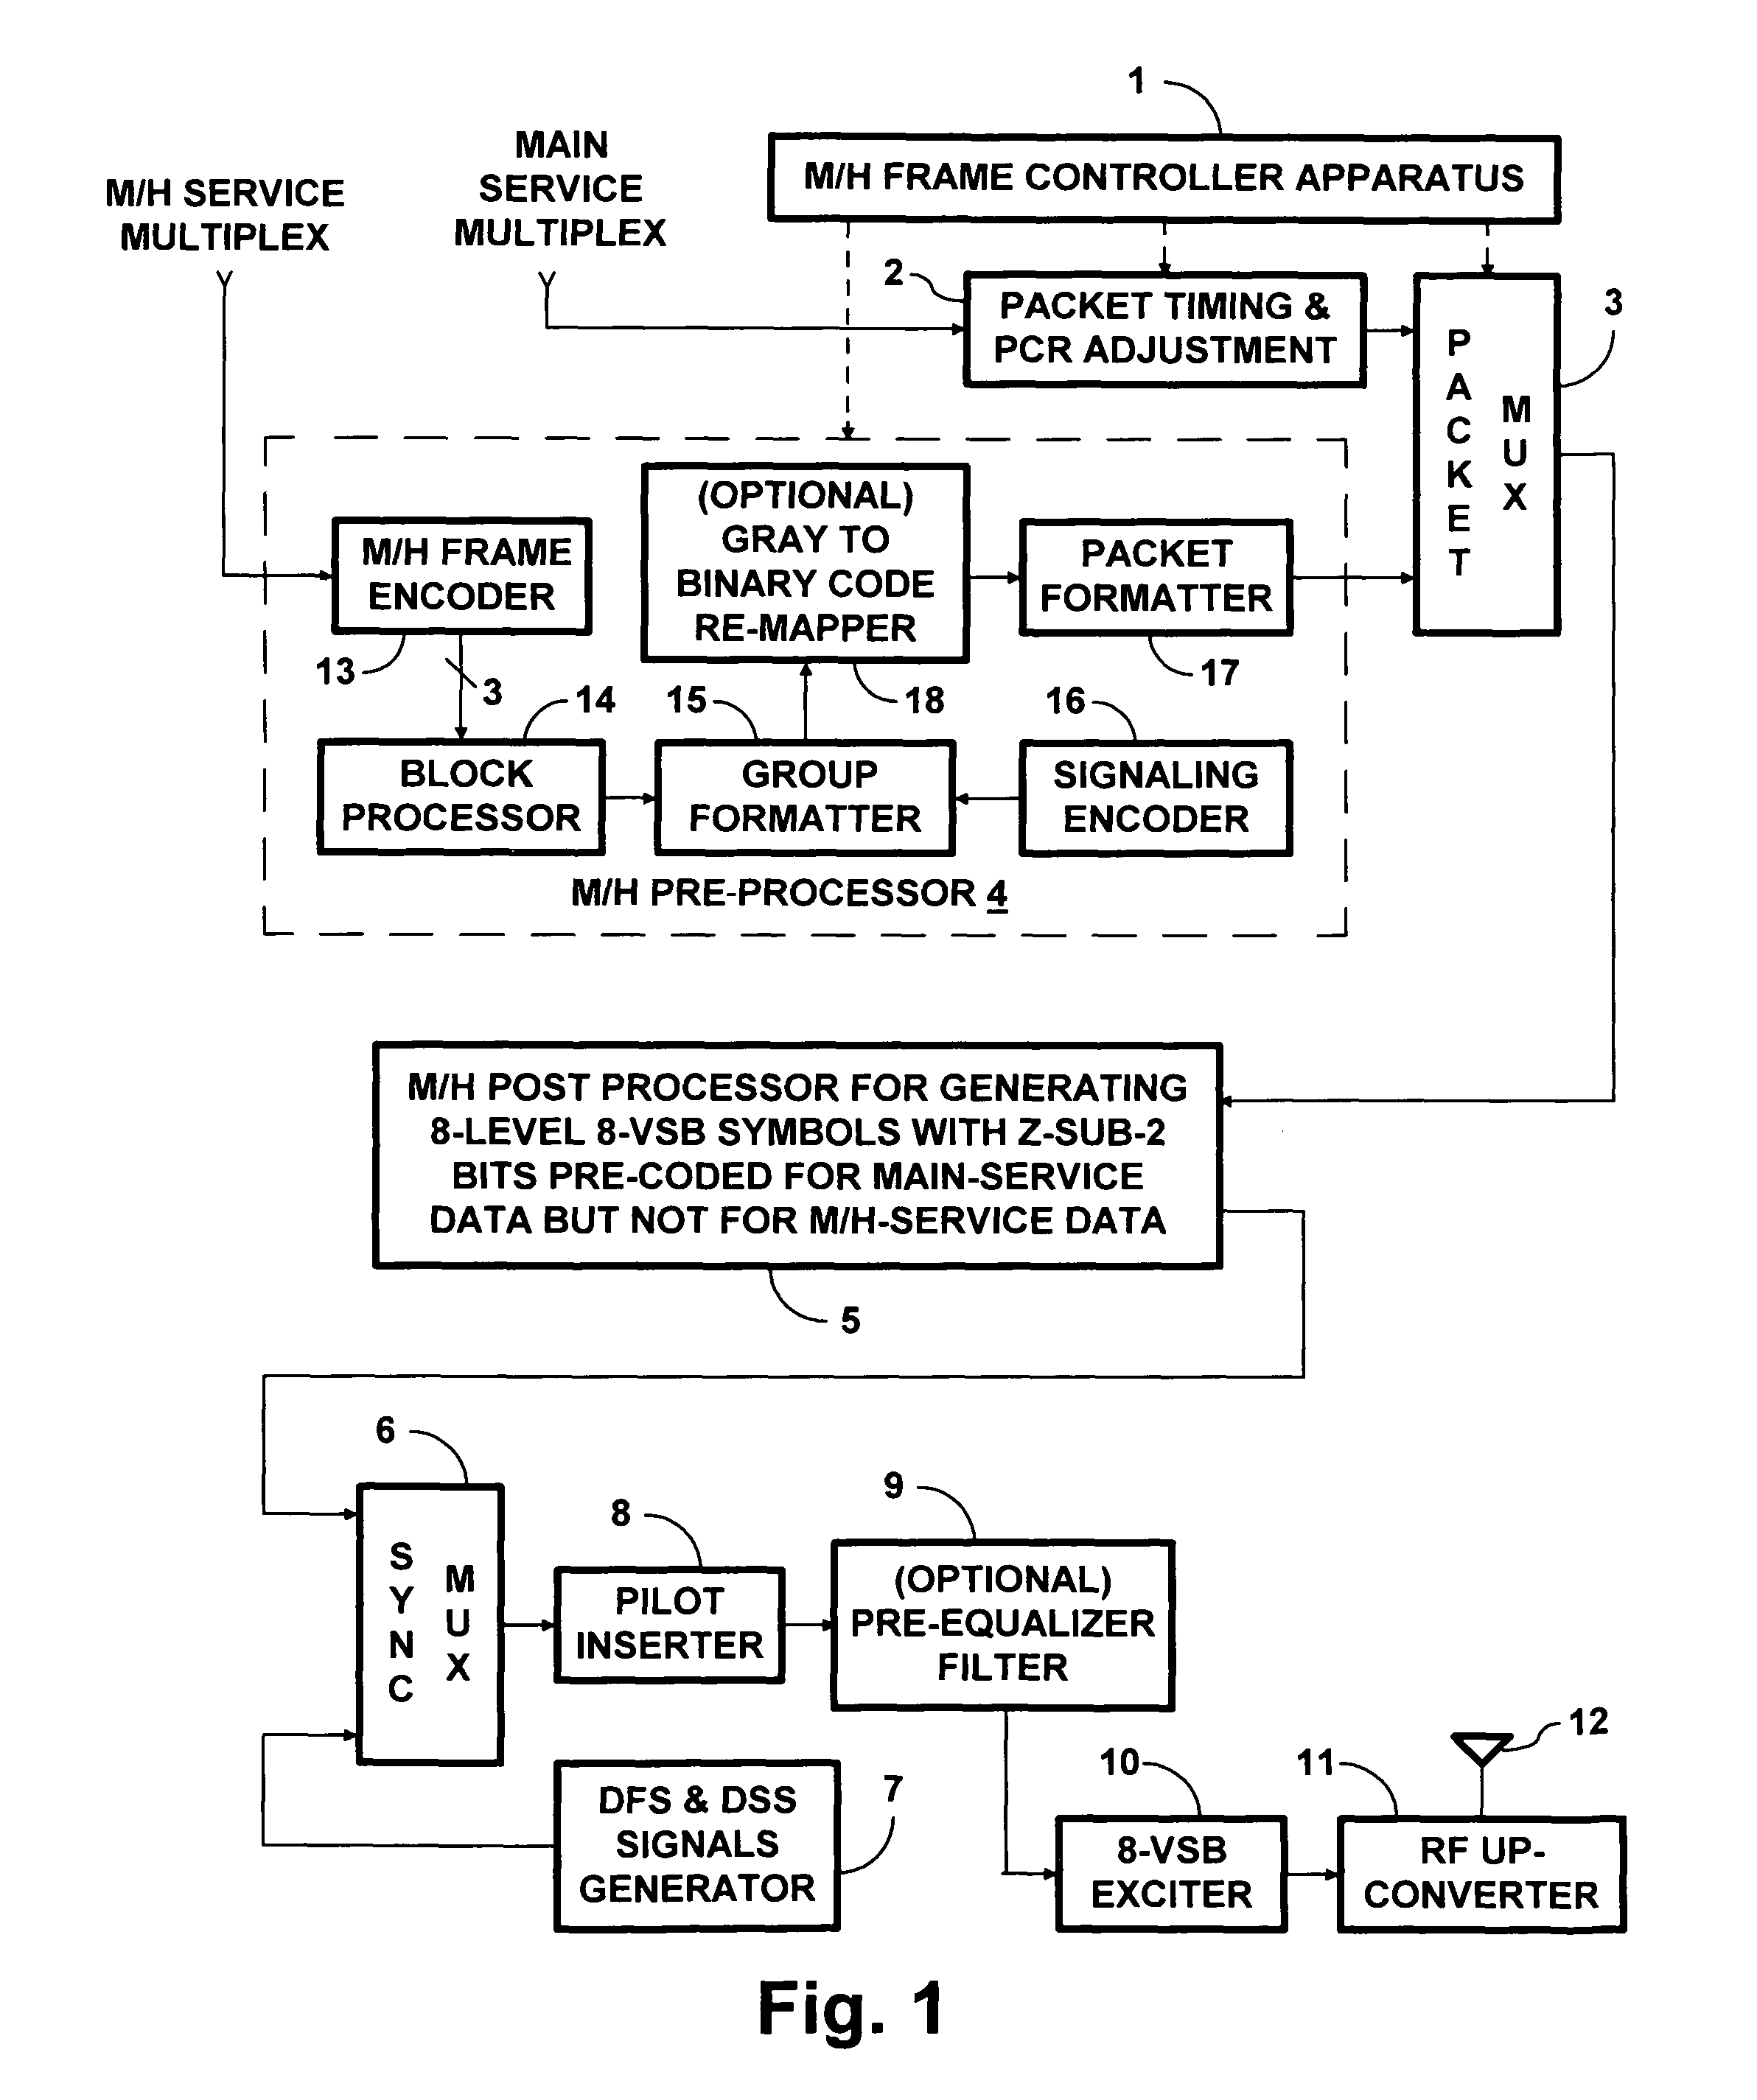 Burst-error correction methods and apparatuses for wireless digital communications systems